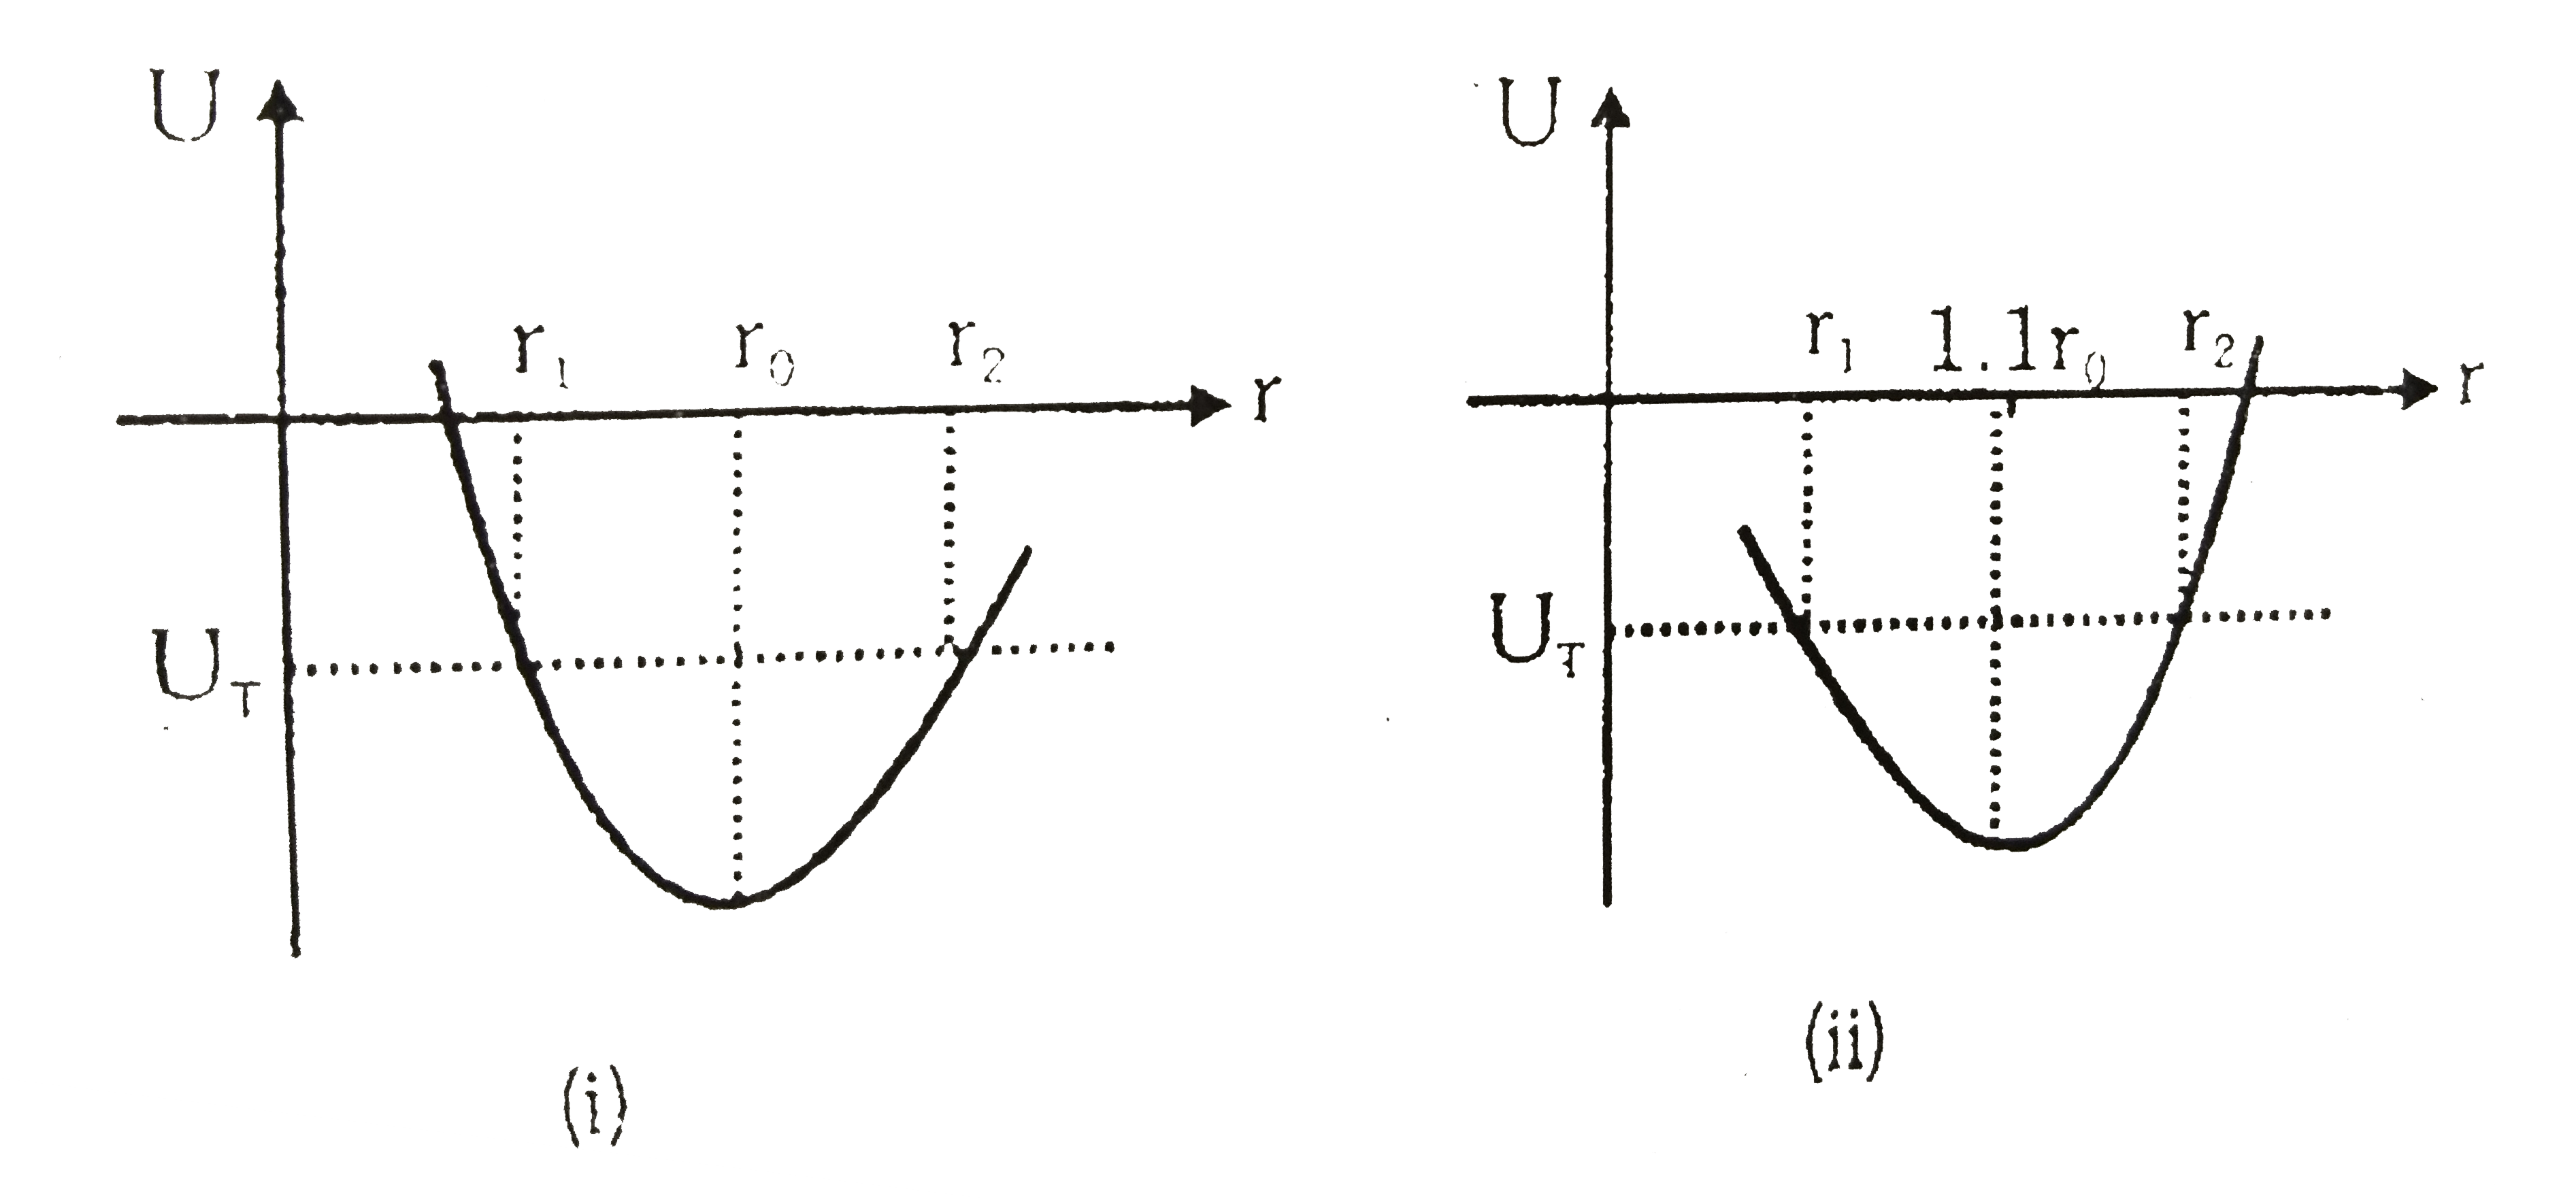 Consider a hypothetical situation where we are comparing the properties of two crystals made of atom A and atom B. Potential energy (U) v//s interatomic separation (r) graph for atom A and atom B is shown in figure (i) and (ii) and respectively.      It is seen that the potential energy can reach a maximum value of U(T) at temperature T= 10K. if r(1) and r(2) are 0.9999 r(0)